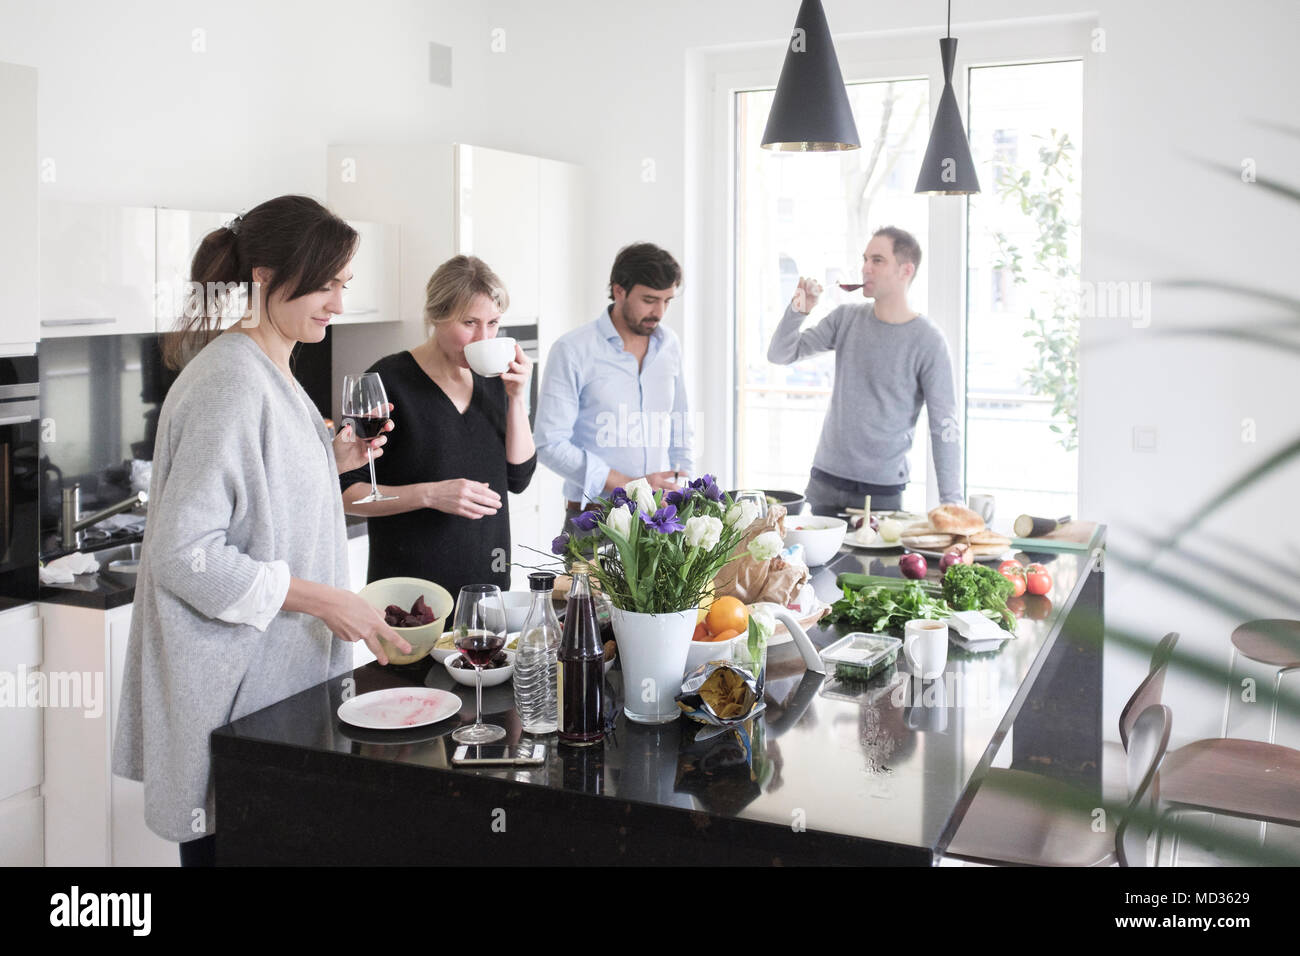 Group of friends  preparing food together.Casually  chatting and snacking on a selection of  vegetarian food while laughing and enjoying themselves in Stock Photo